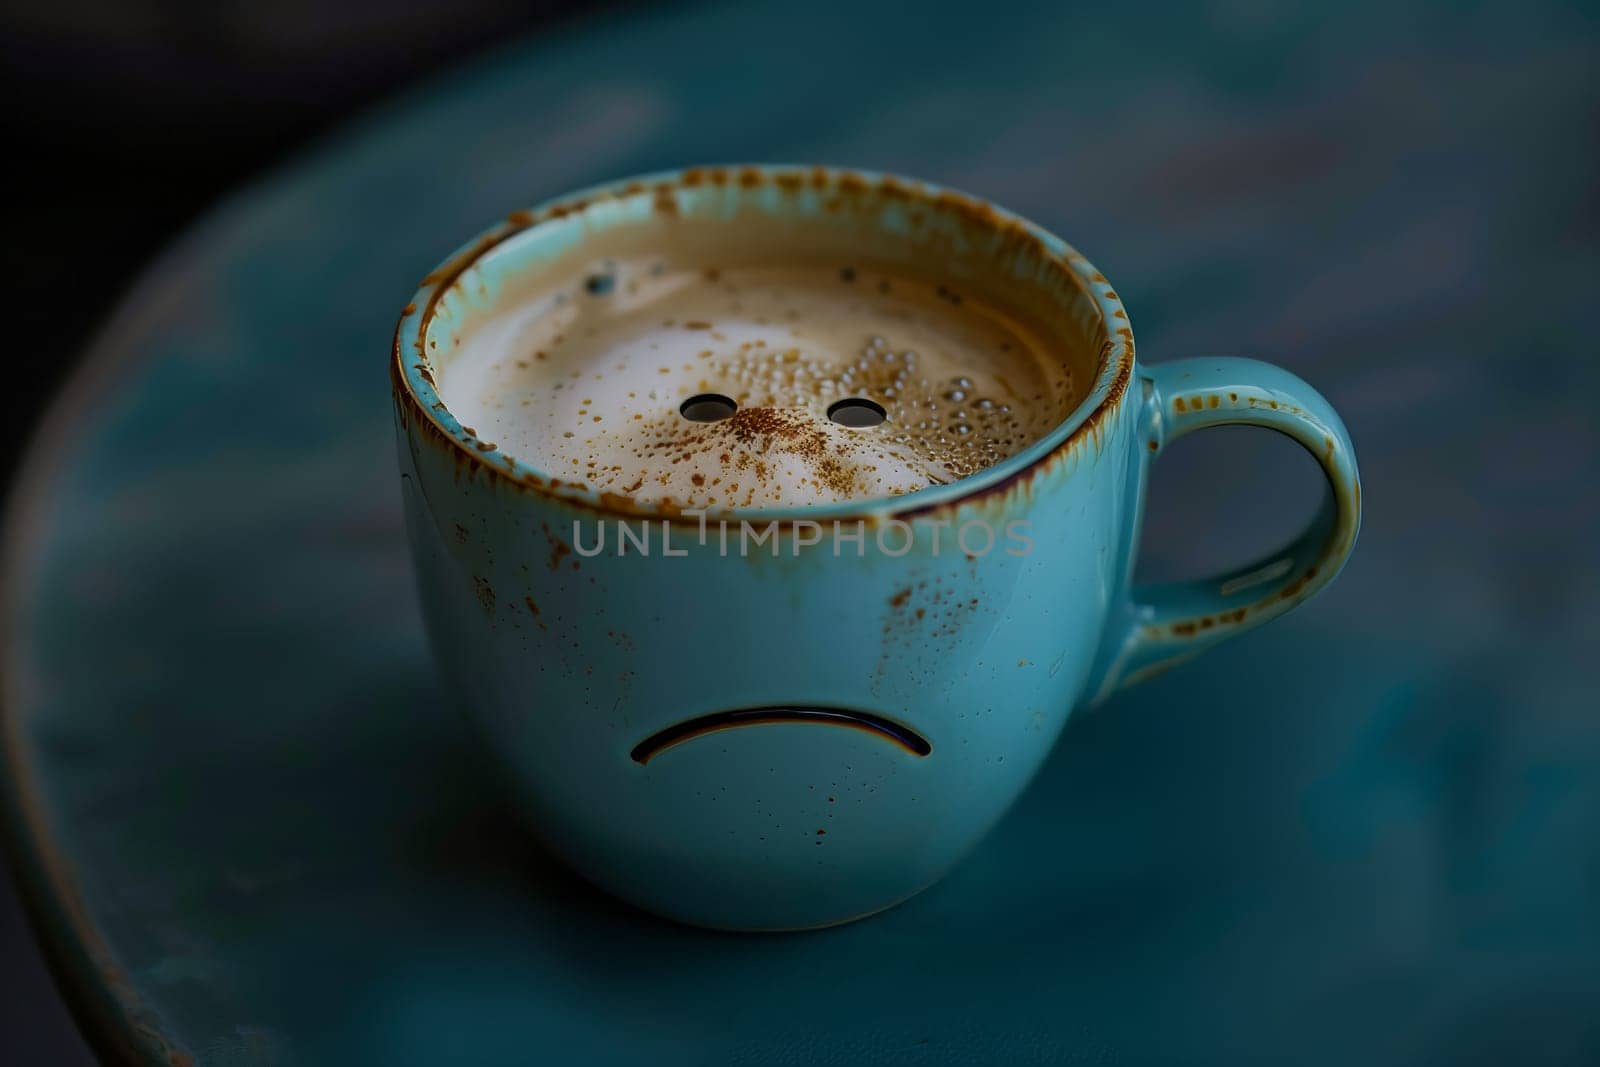 A coffee cup with a drawn sad face on it sitting on a saucer. The tableware holds a drinkware filled with the ingredient of coffee, such as Wiener melange or Cuban espresso